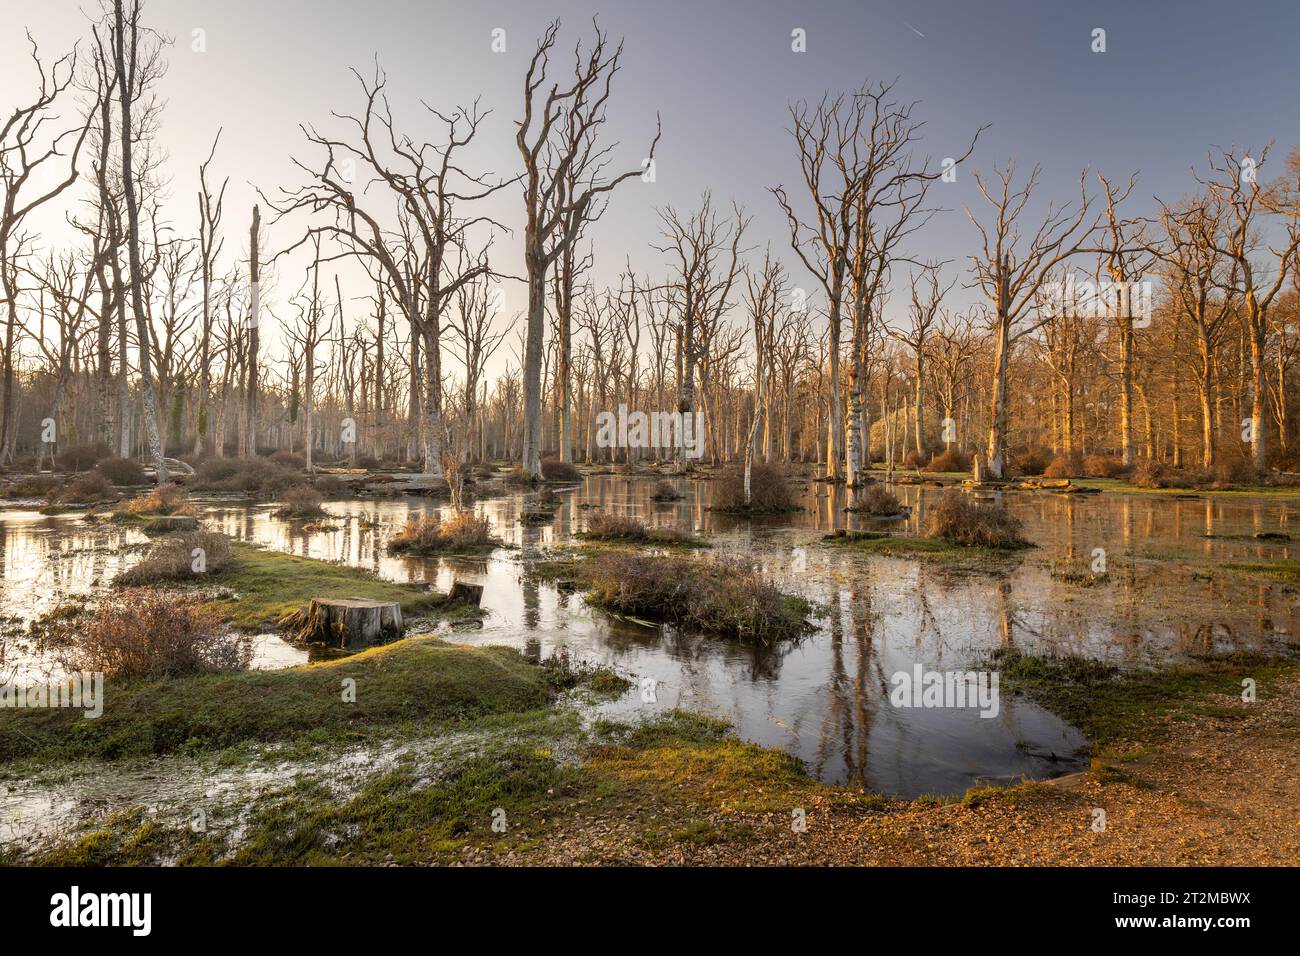 A scene of trees that have have died through flood damage and show silver trunks reflecting in water below. New Forest, Hampshire, UK Stock Photo